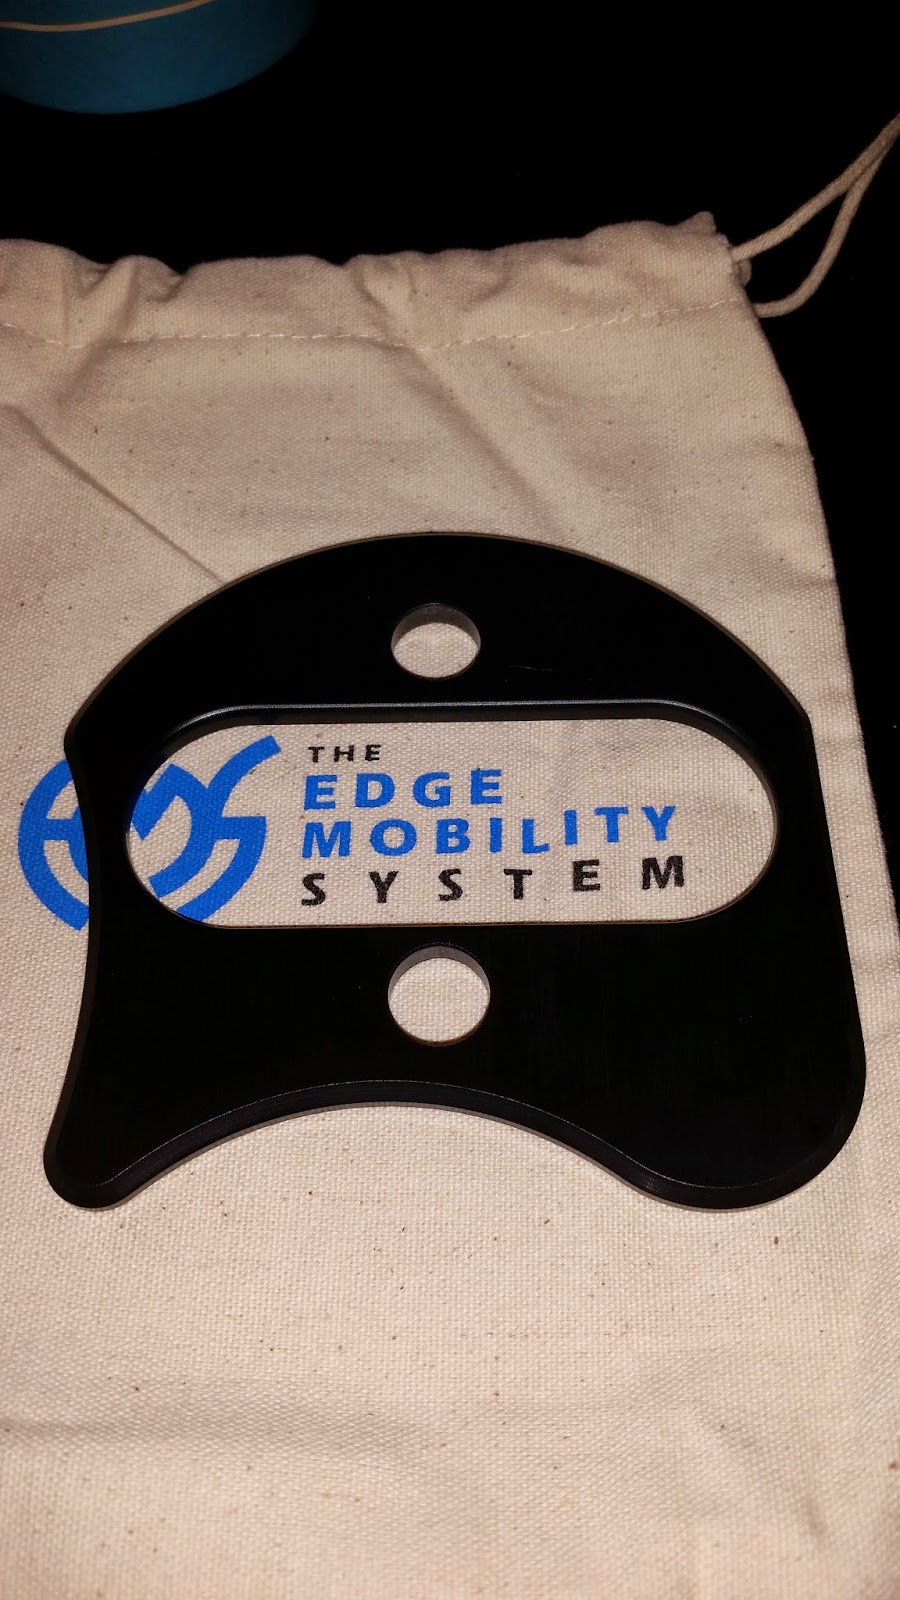 EDGE Mobility Tool Review